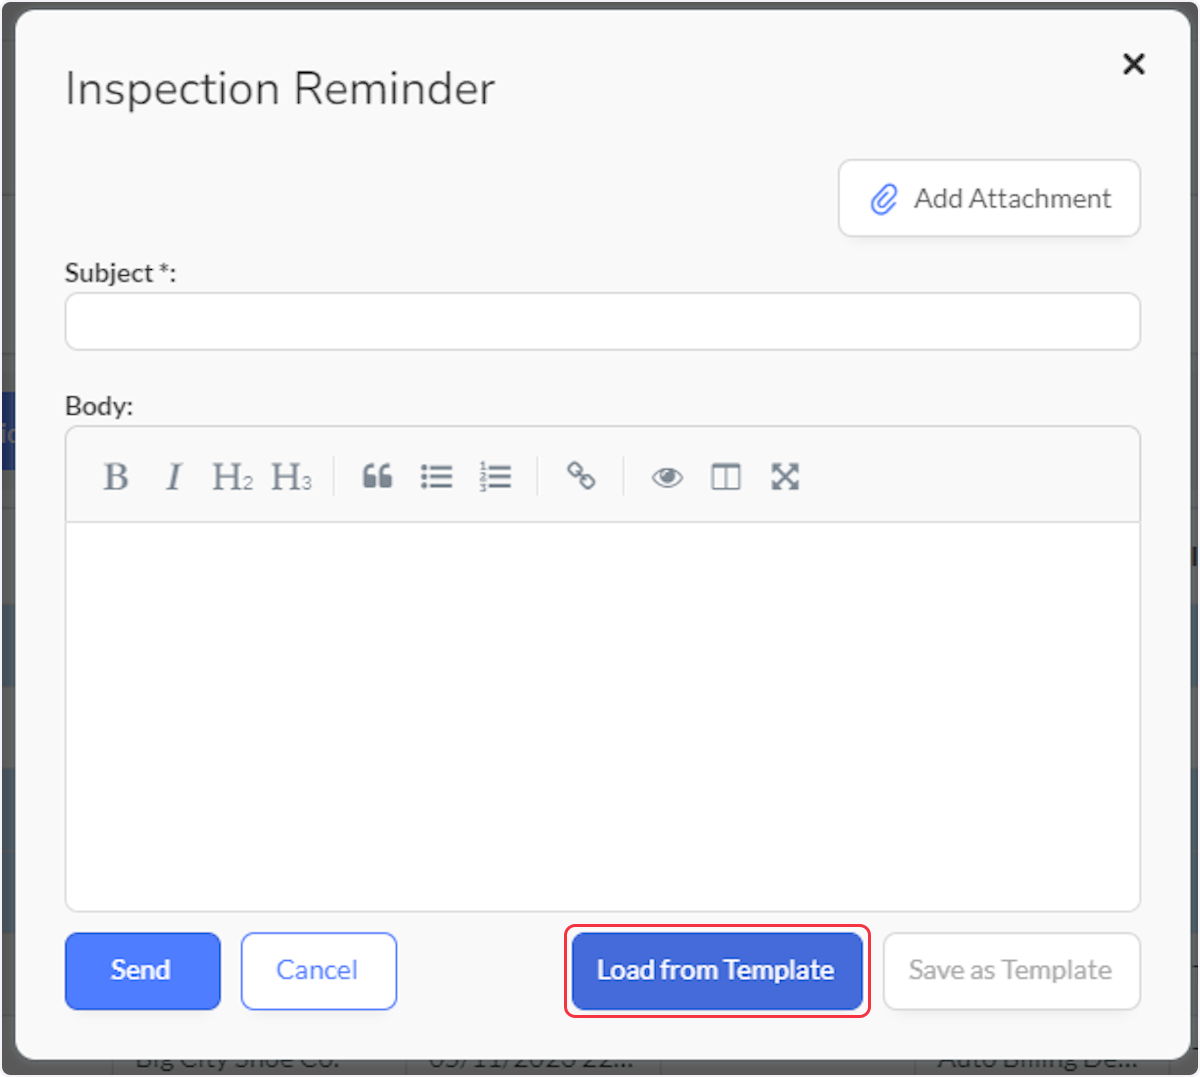 To send the Inspection Reminder email from a template, click on Load from Template.